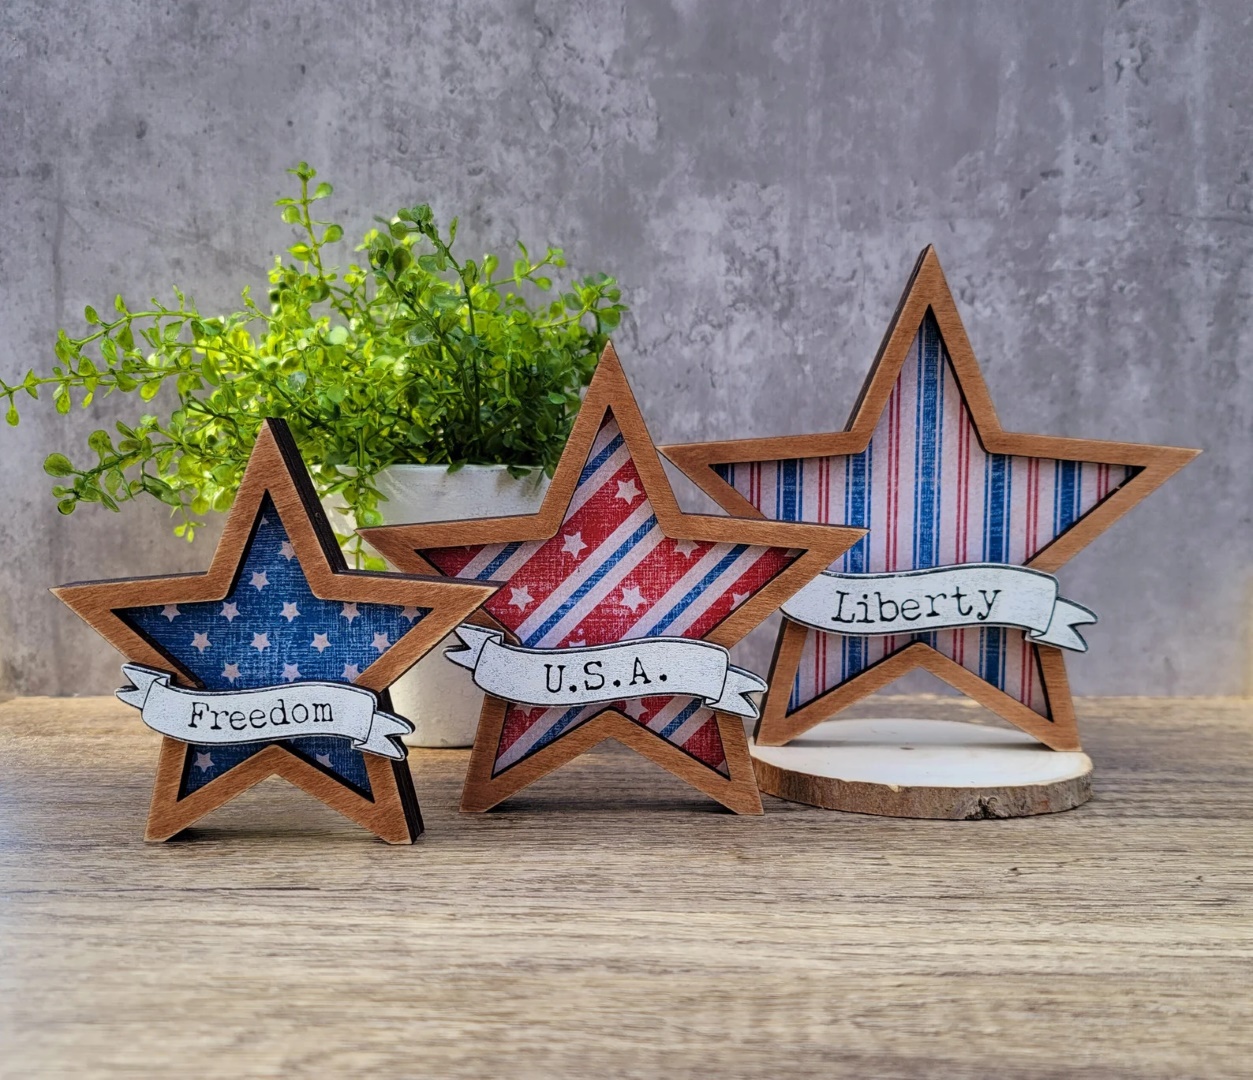 20 Easy and Impressive Last-Minute 4th of July Decor Ideas for Every Space